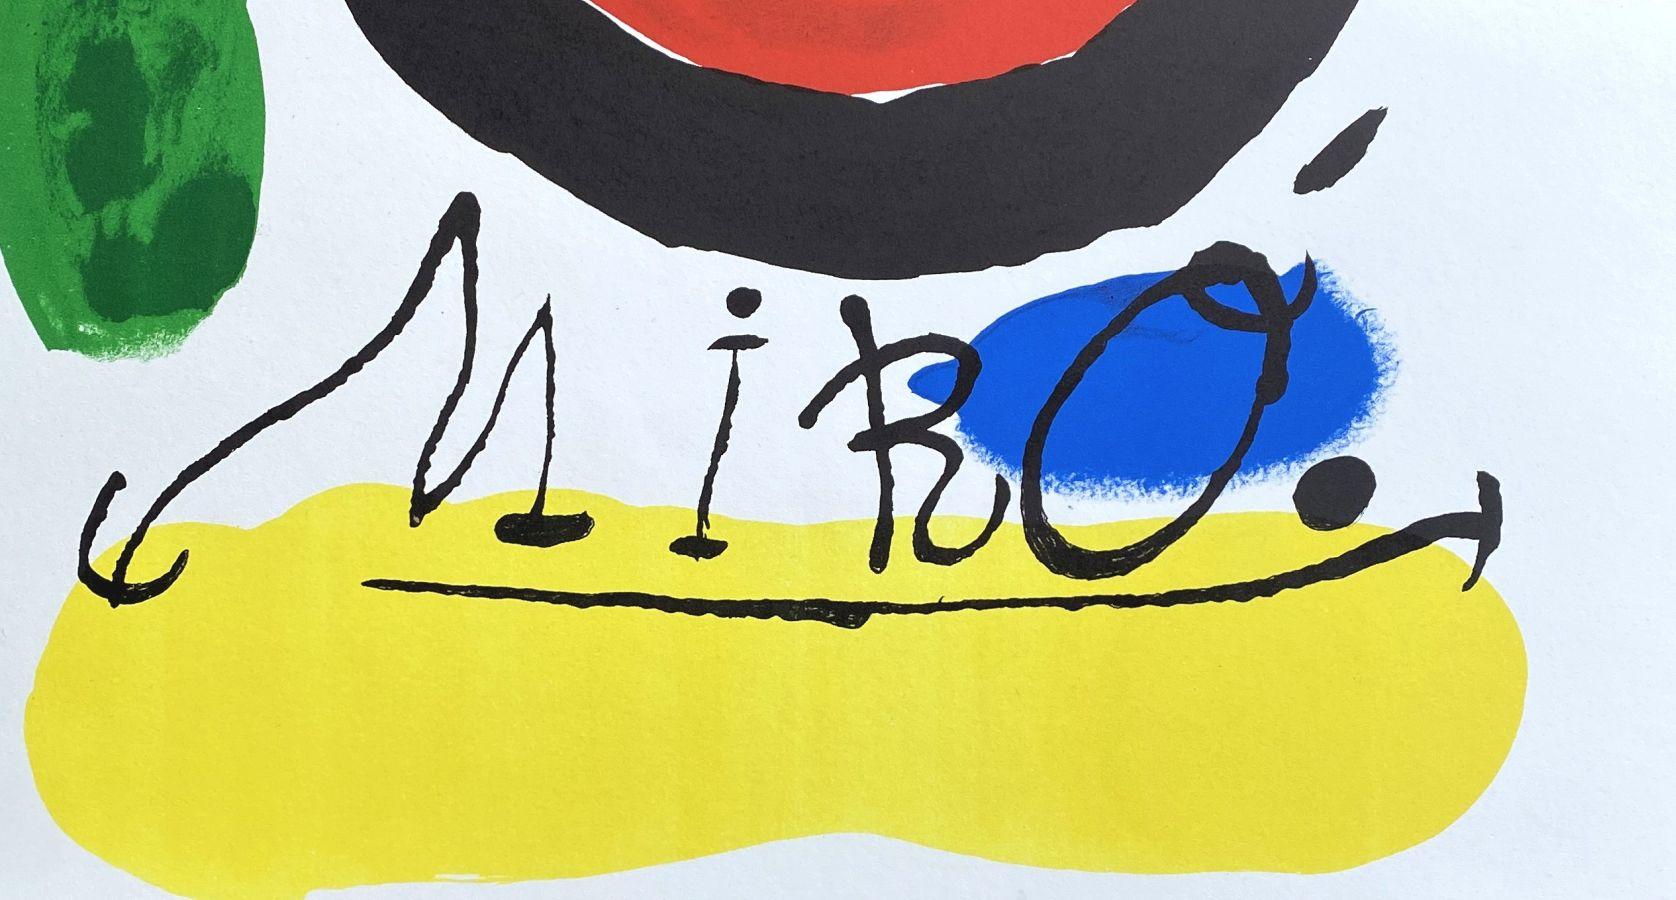 Joan Miro
Surrealist Bird, 1971

Lithograph in colors 
Signed in the plate
Printed in Arte workshop, Paris
On vellum size 72 x 55 cm (c. 28 x 21.5 in)
Very good condition

REFERENCE : Arte Affiches 1964-1971, n° 154